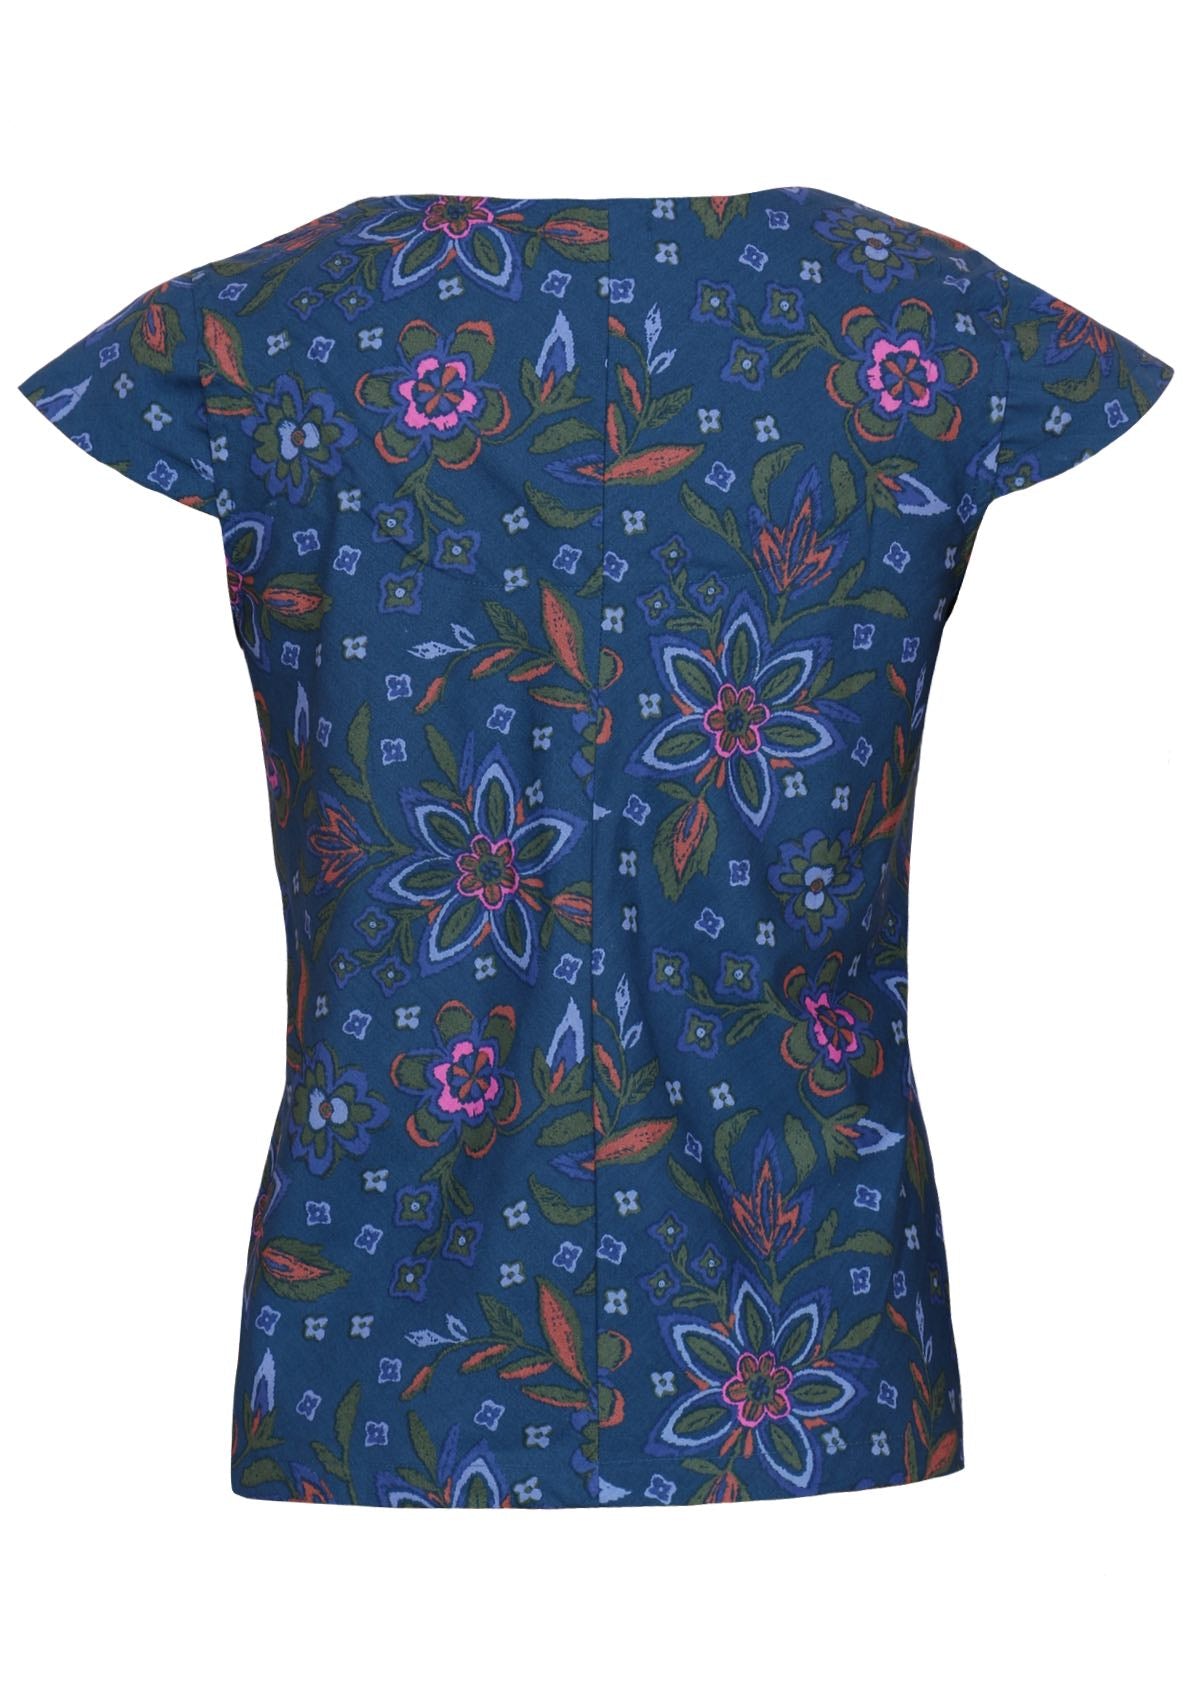 100% cotton cap sleeve top features a colourful floral pattern on a blue base. 